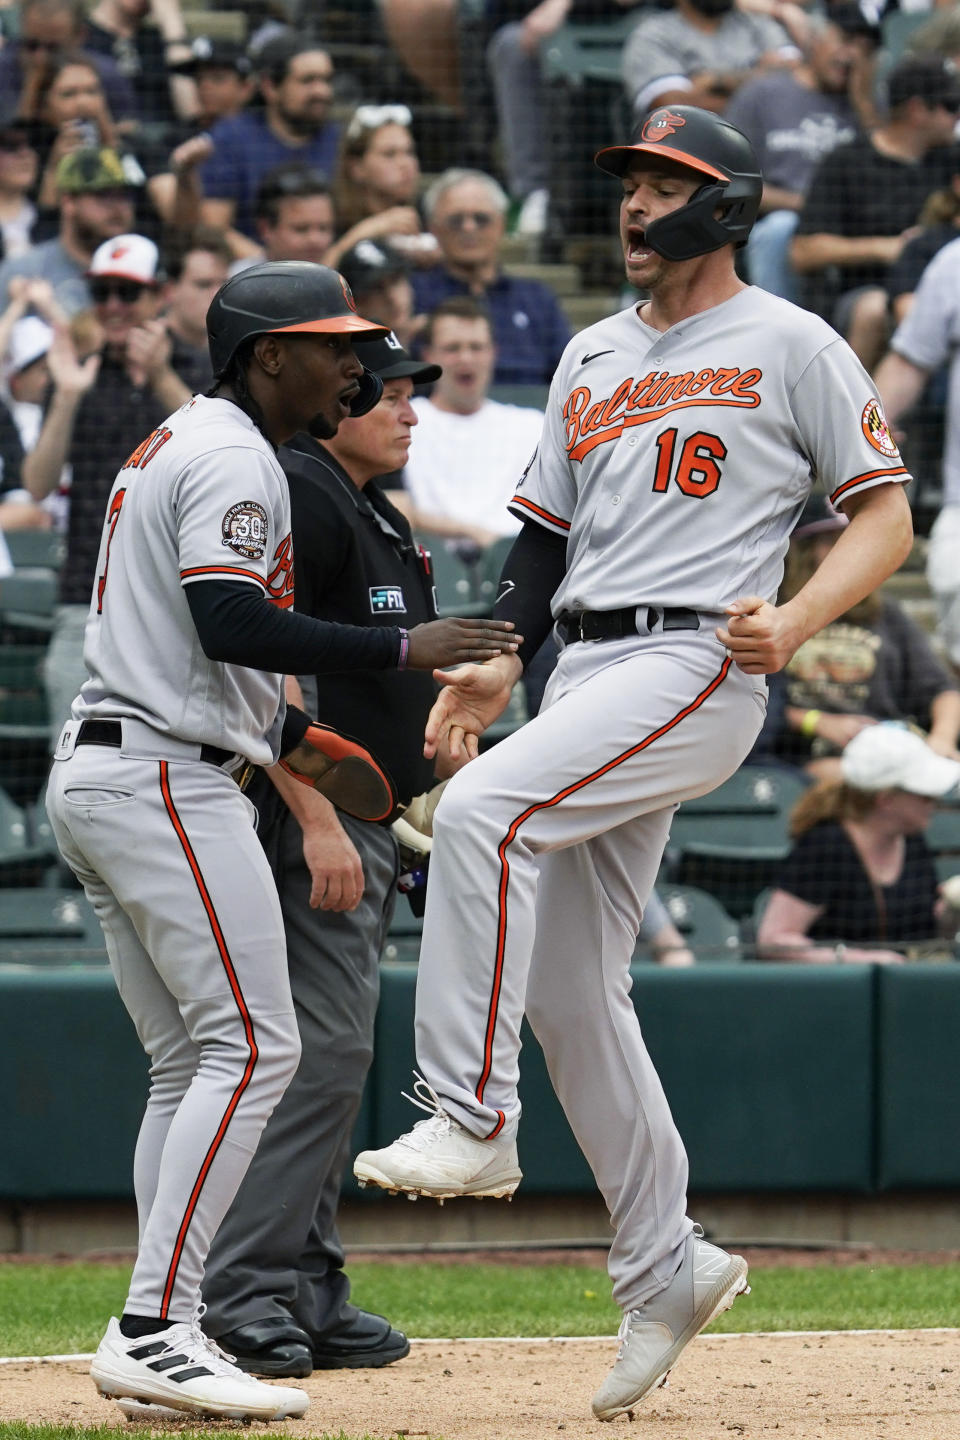 Baltimore Orioles' Trey Mancini, right, celebrates with Jorge Mateo after scoring on a three-run double by Austin Hays during the seventh inning of a baseball game against the Chicago White Sox in Chicago, Saturday, June 25, 2022. (AP Photo/Nam Y. Huh)